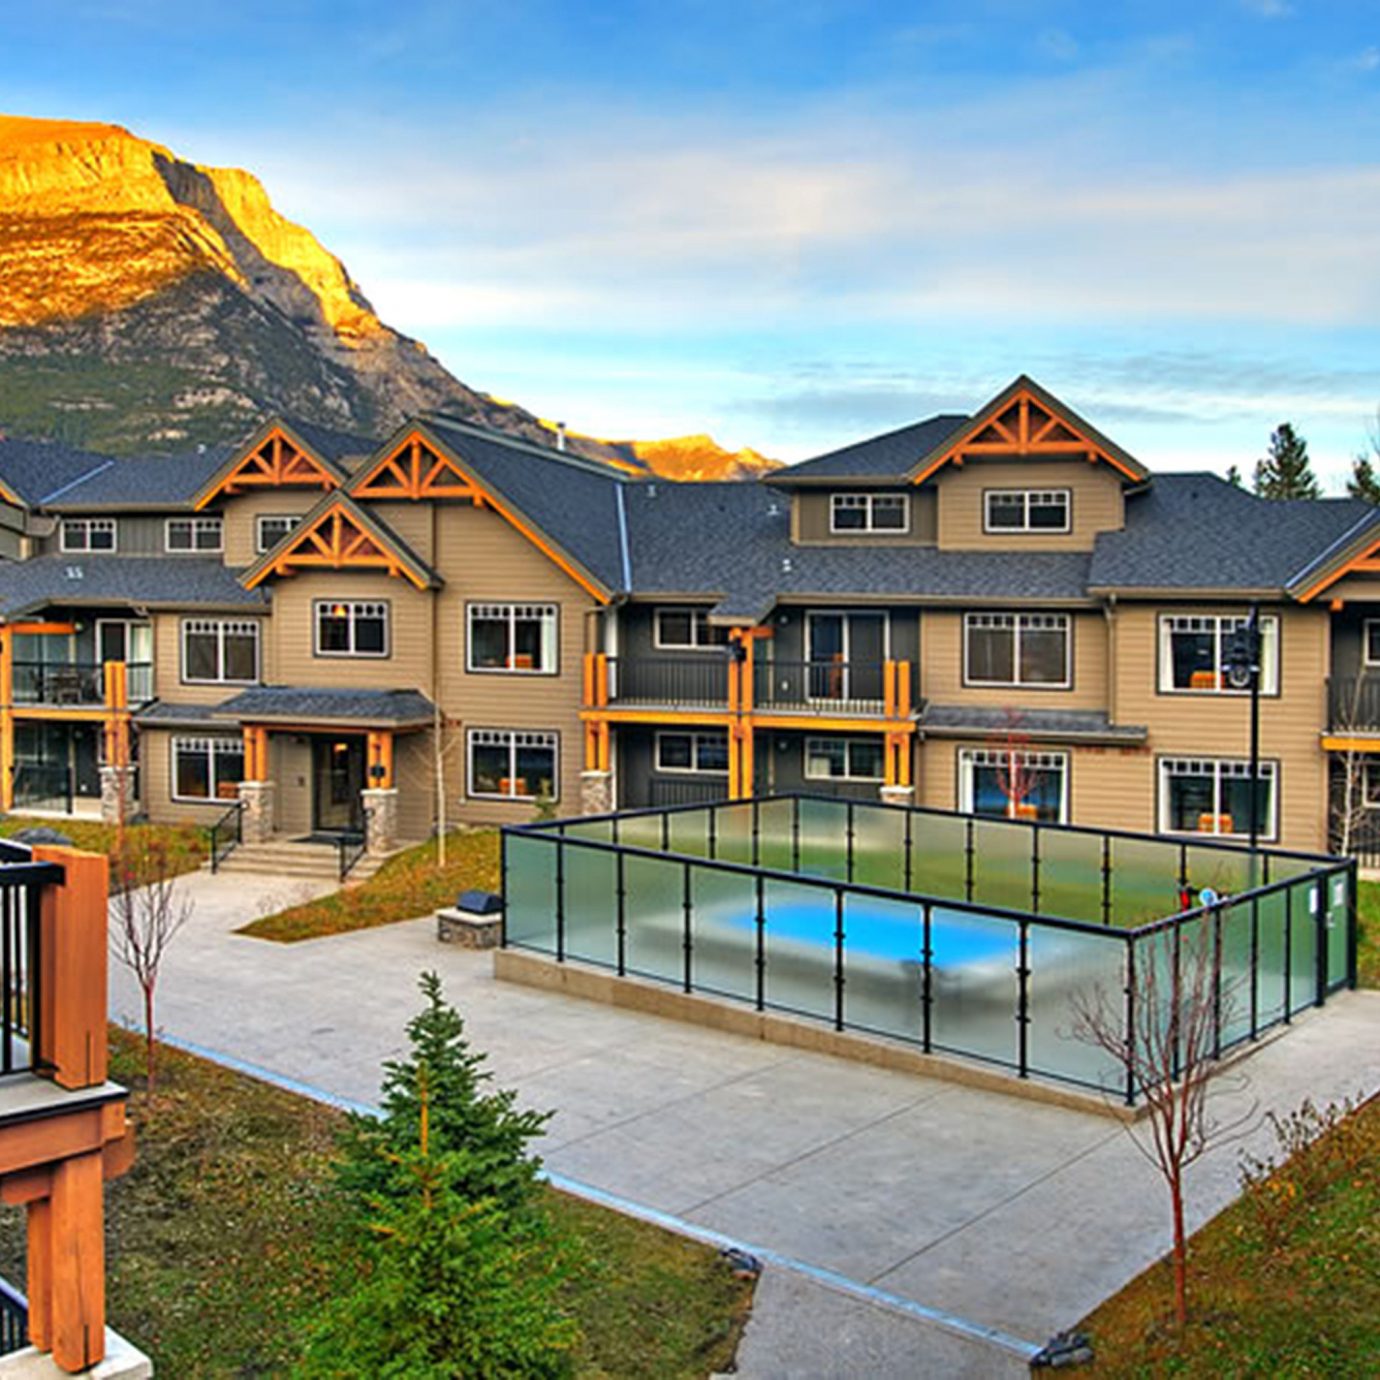 Architecture Buildings Exterior Mountains Pool Resort sky house property home building residential area mountain cottage Villa